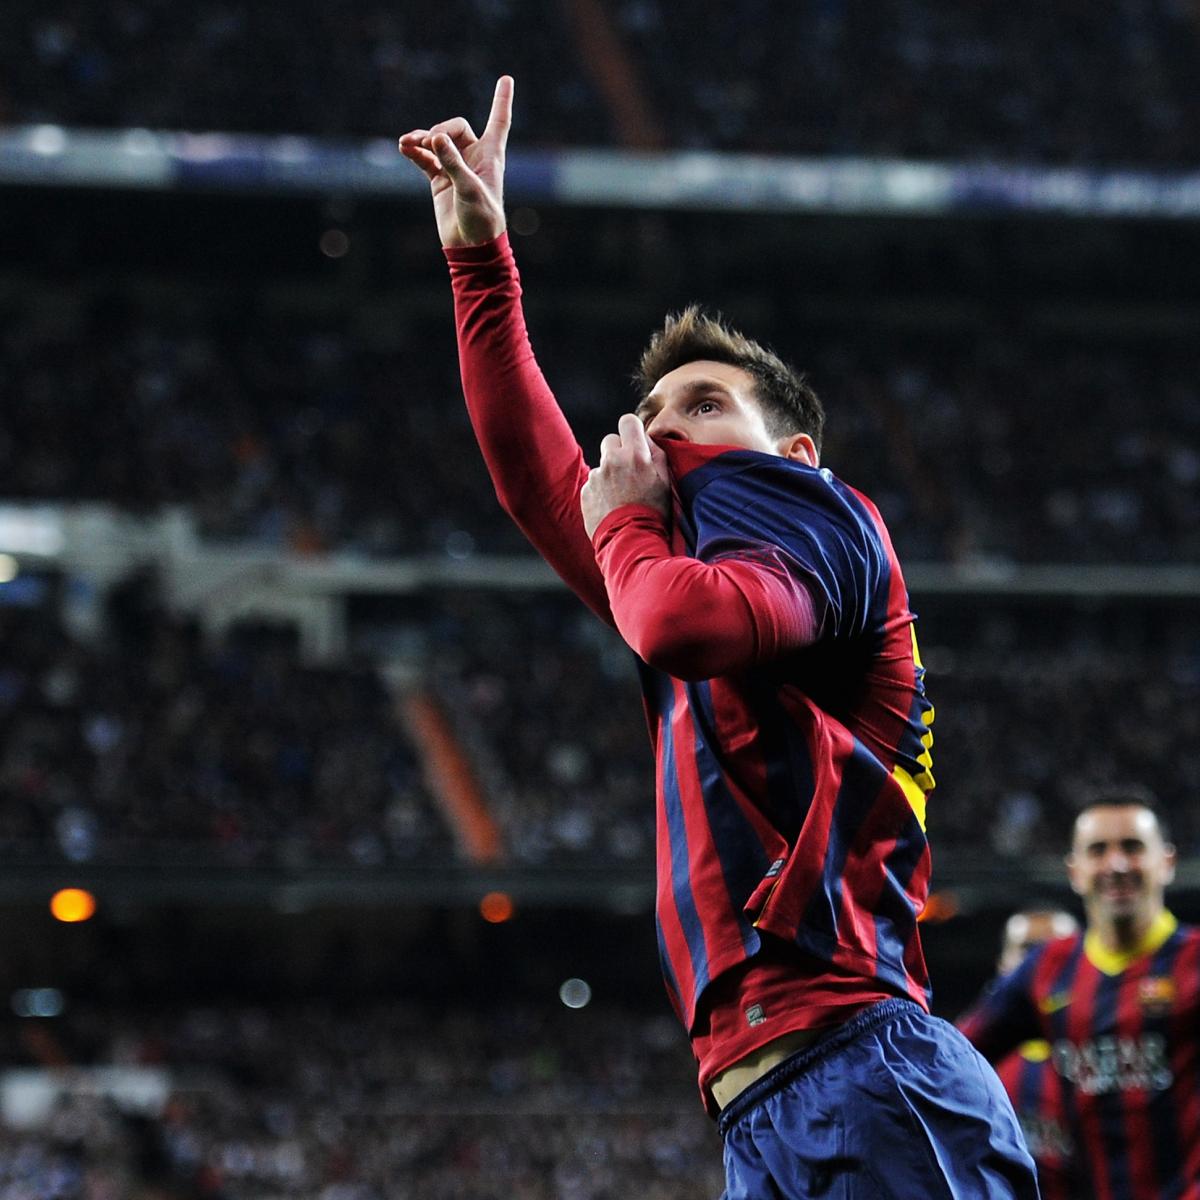 Lionel Messi Tribute May Be Staged at Real Madrid's Bernabeu, Says LFP President